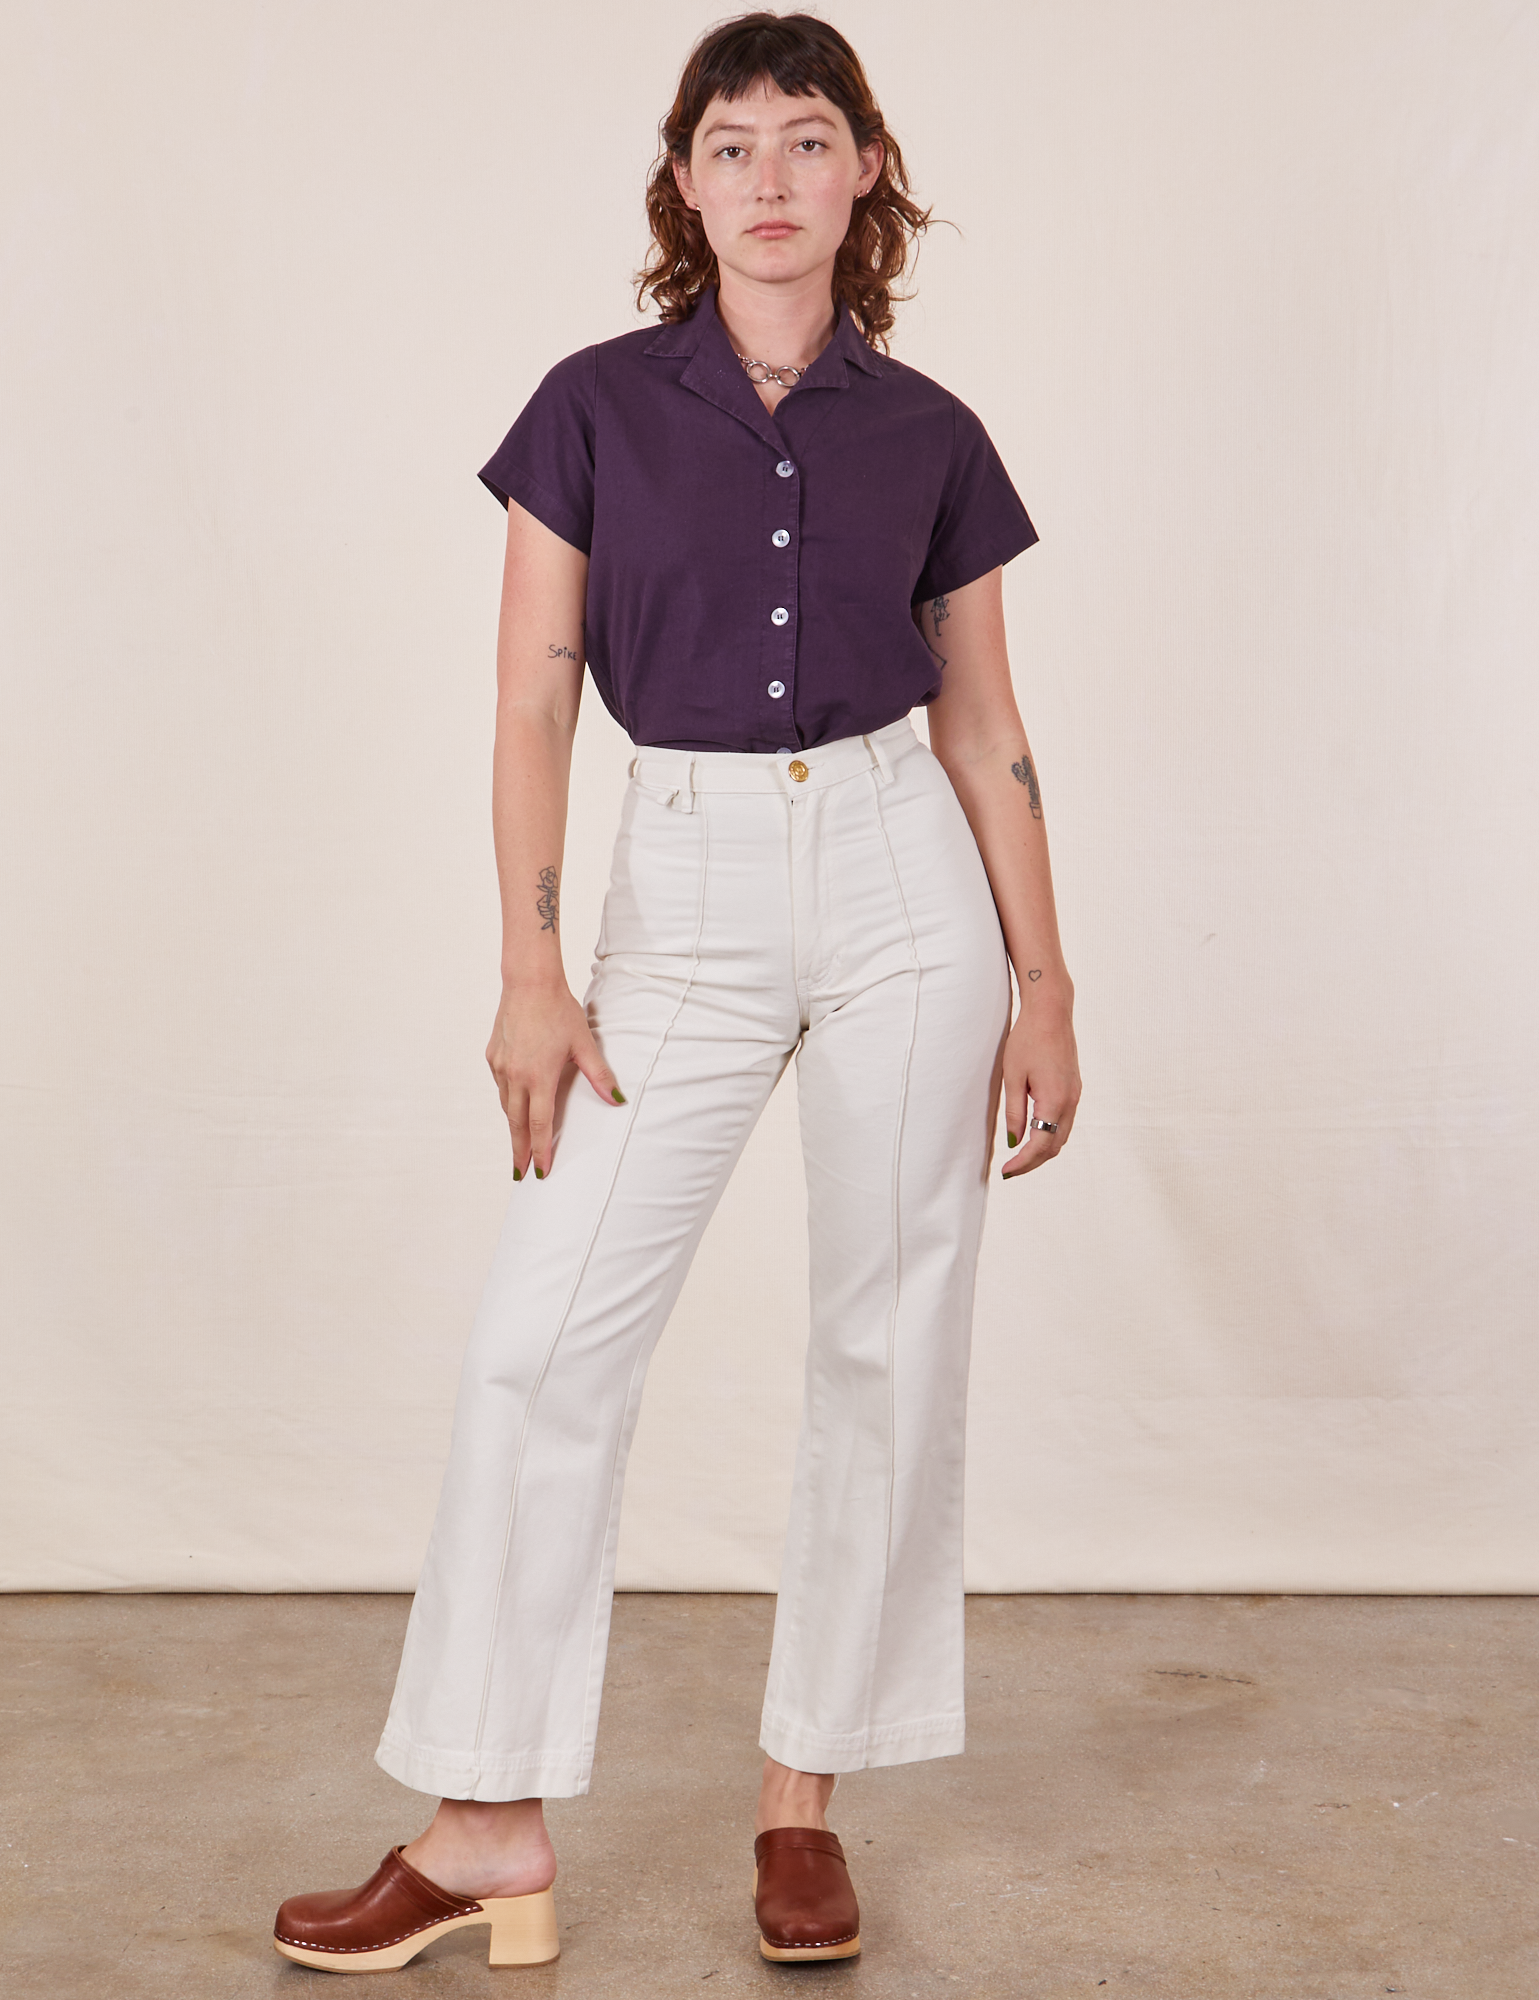 Alex is wearing Pantry Button-Up in Nebula Purple tucked into vintage tee off-white Western Pants